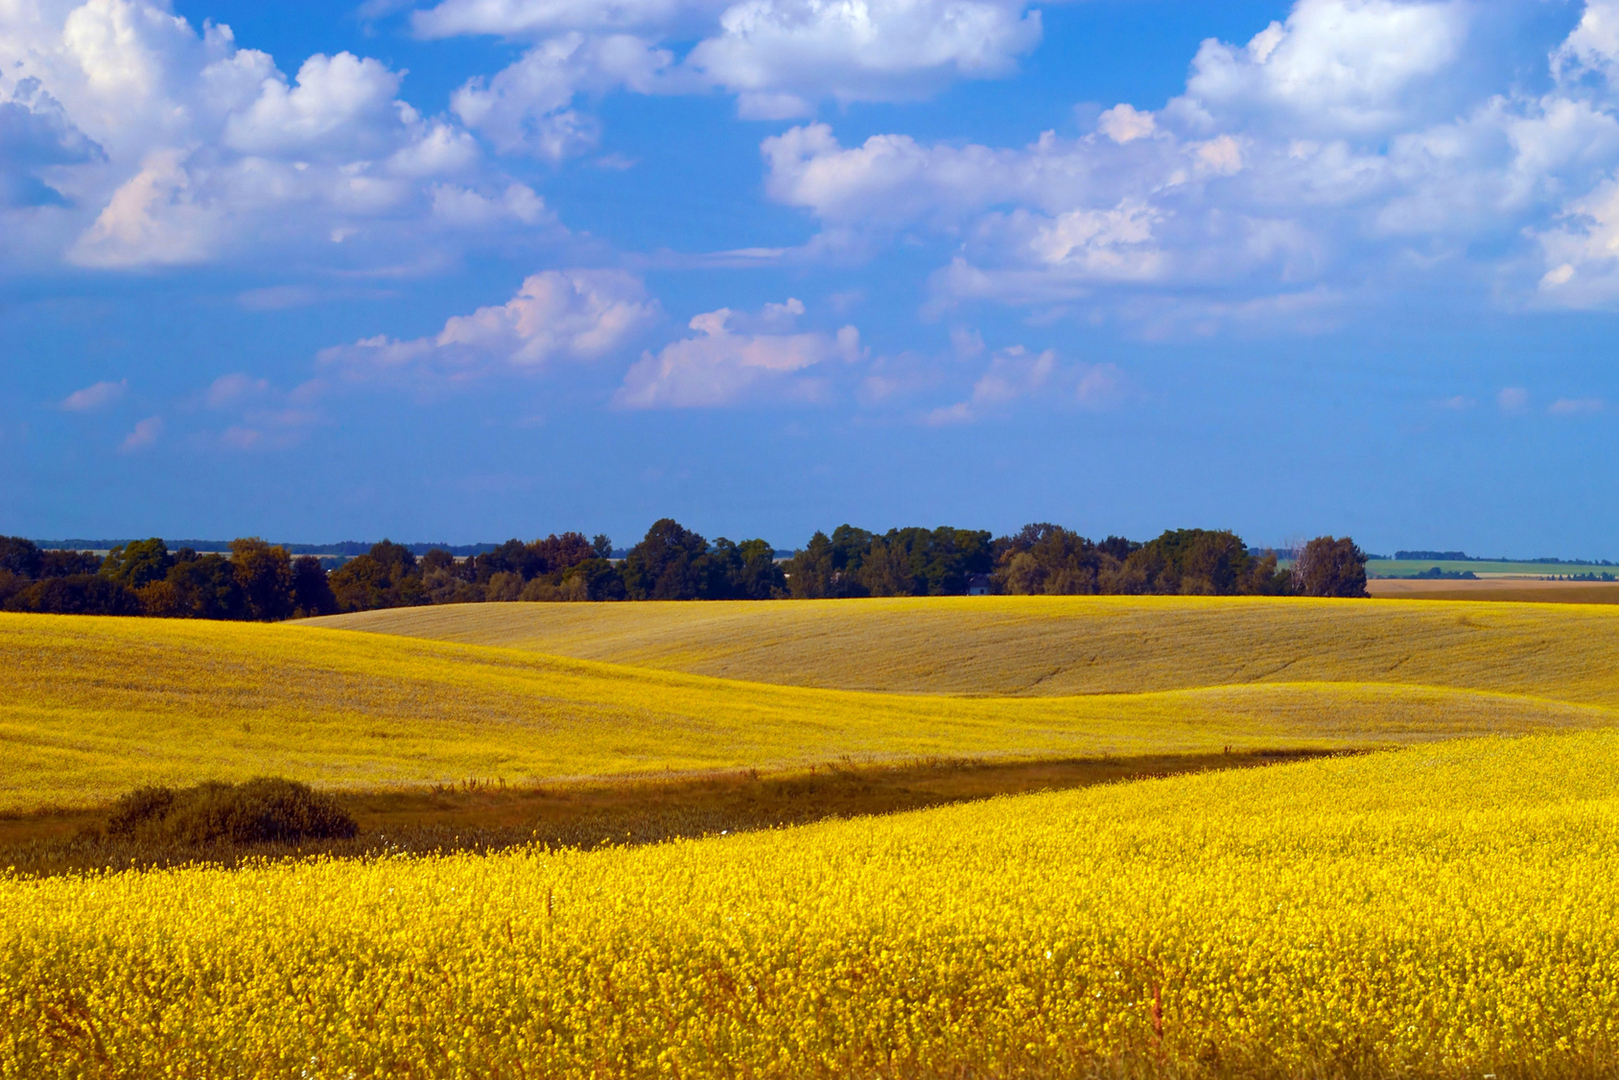 A landscape of yellow field and blue sky